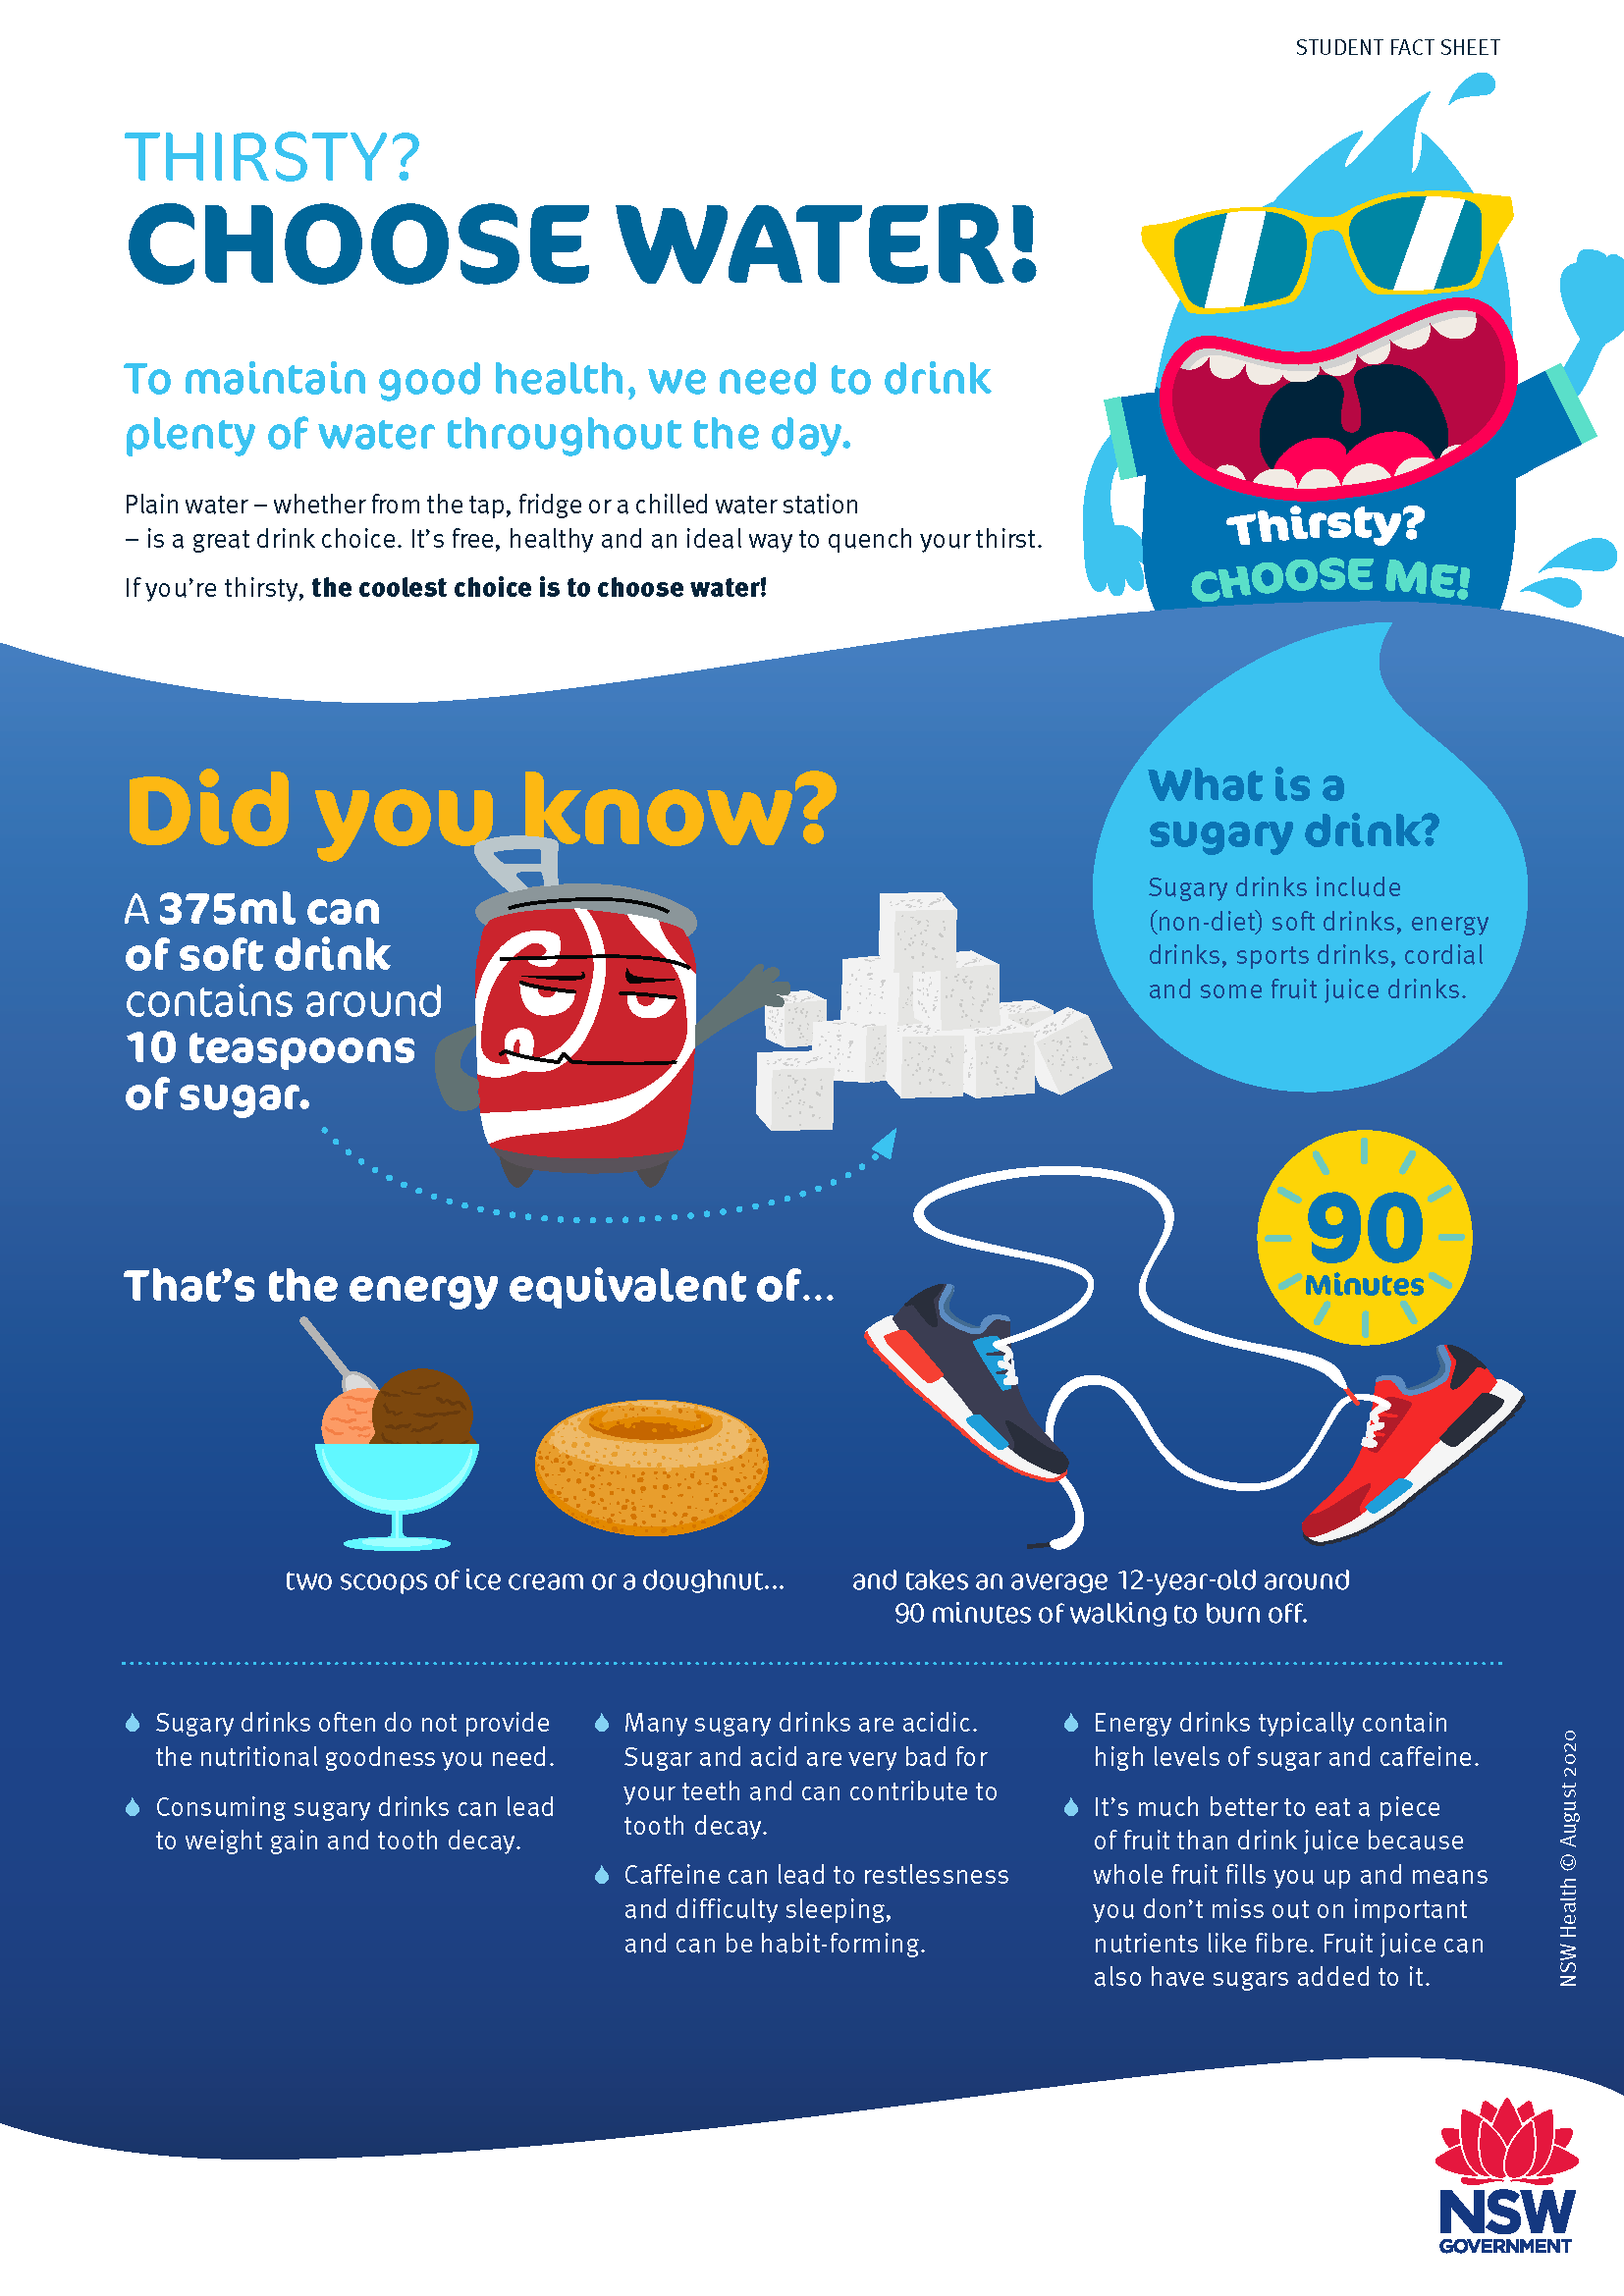 Thirsty? Choose Water! Students Fact Sheet Benefits of Drinking Water